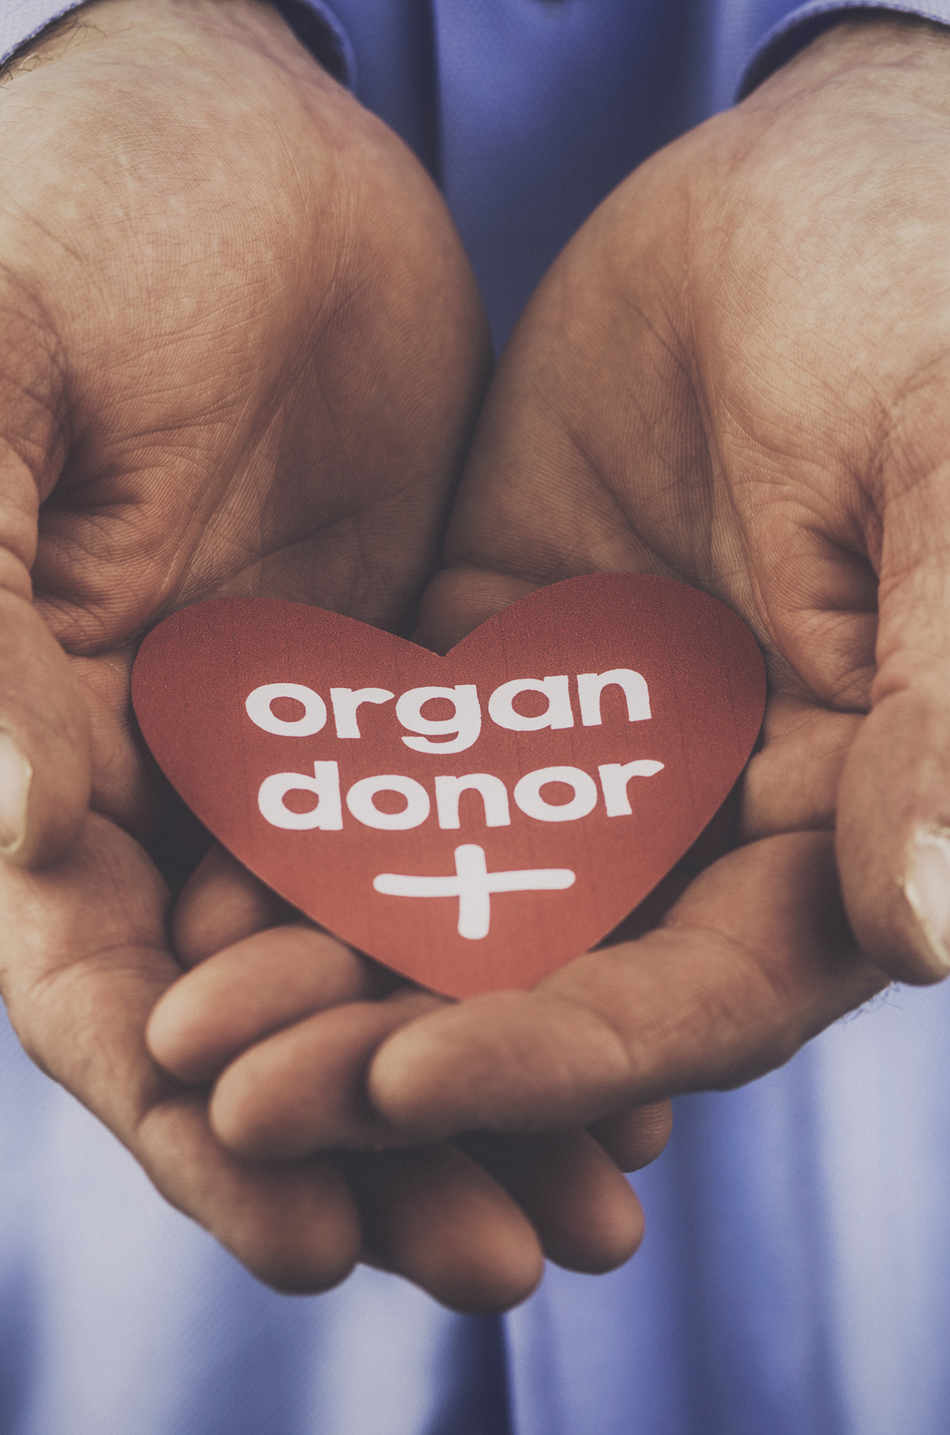 Myths and Misconceptions About Organ Donation